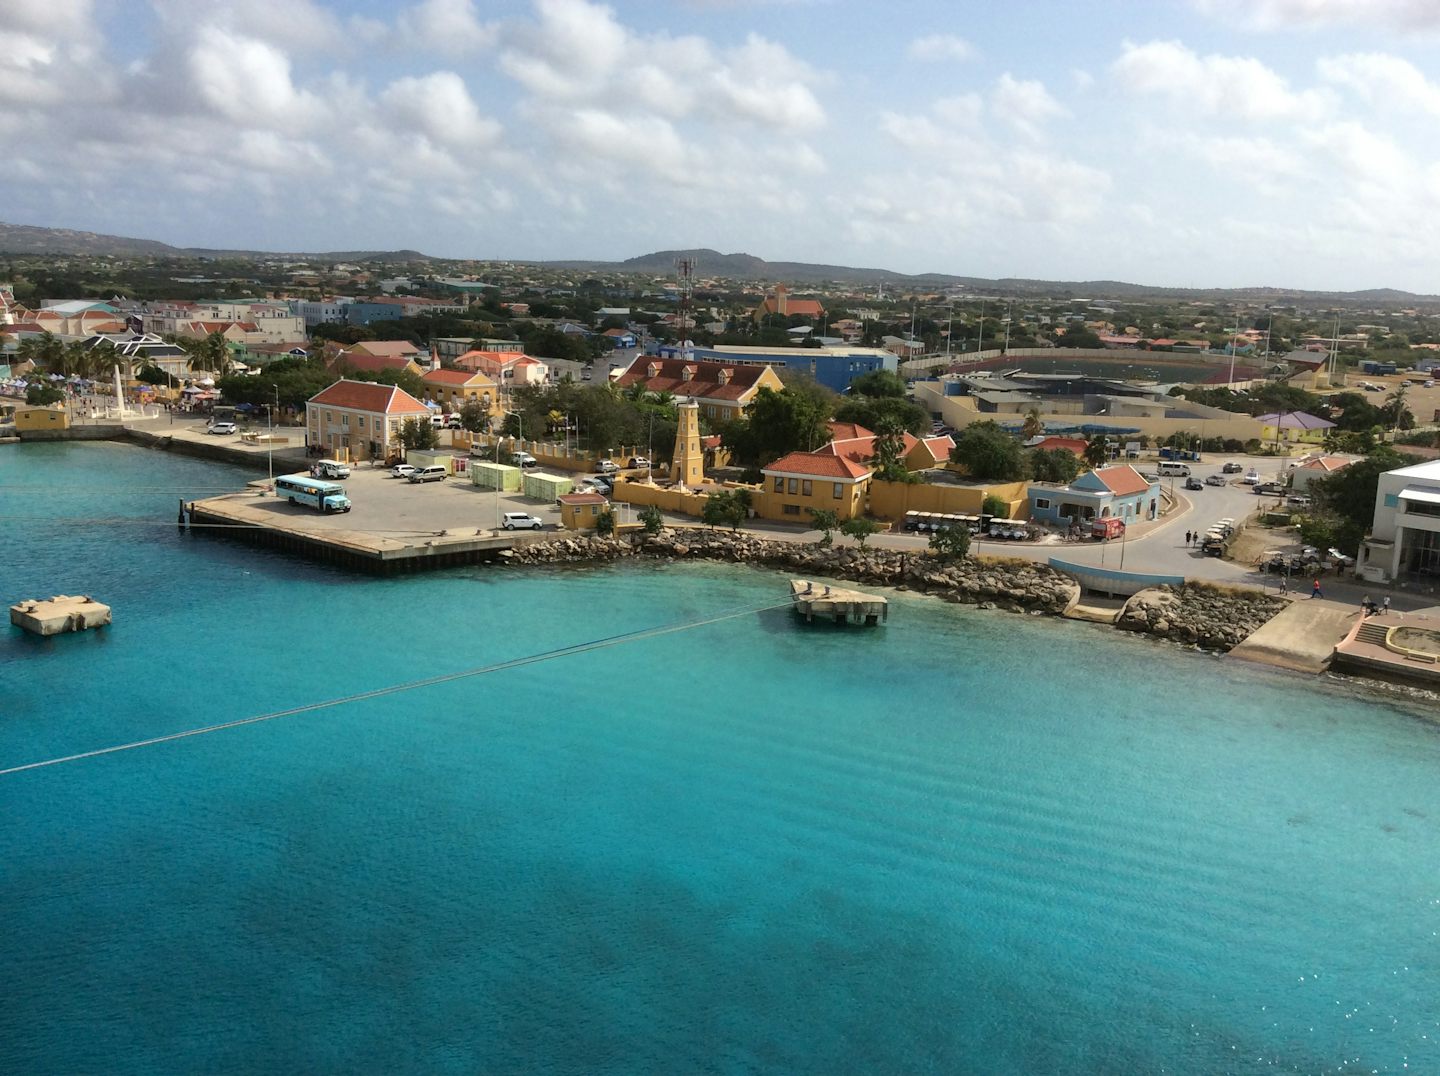 Curaçao port view from ship